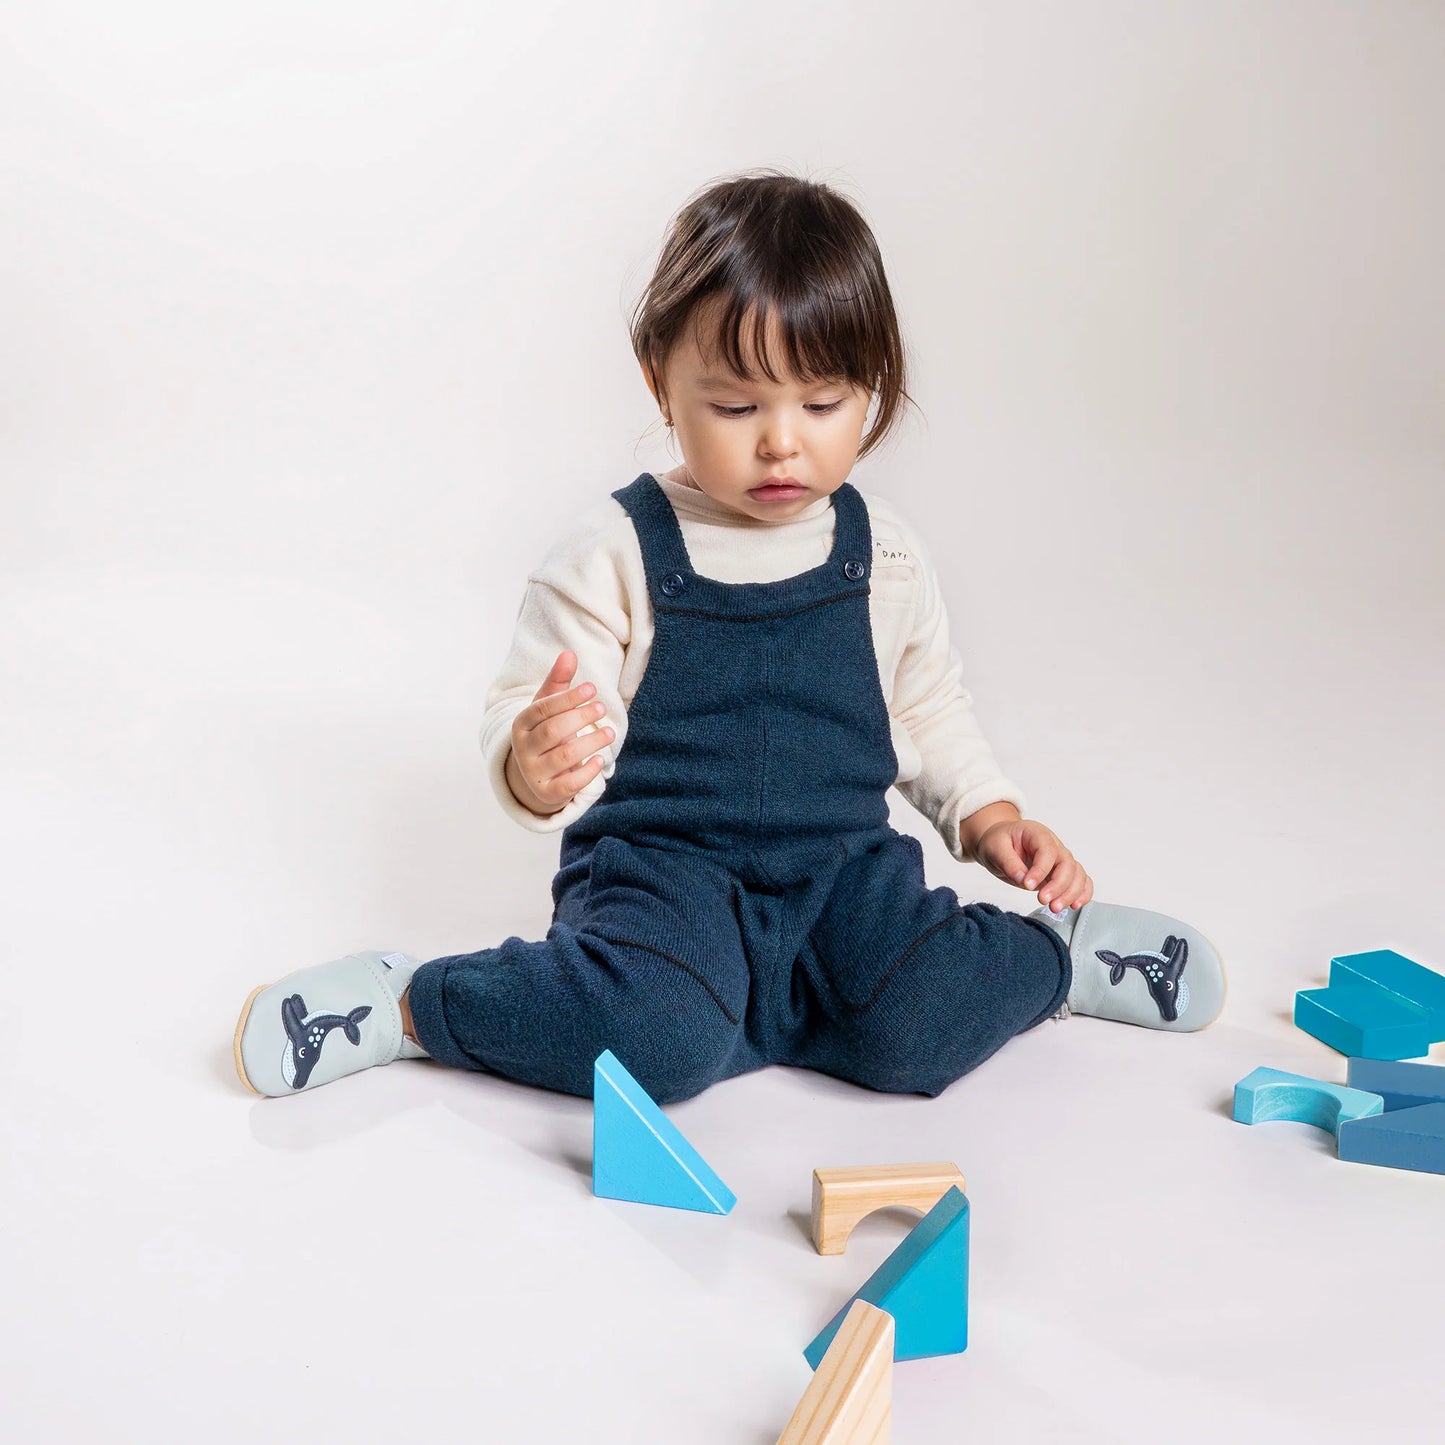 Soft Baby Moccasins Shoes with Whale Design By Olea